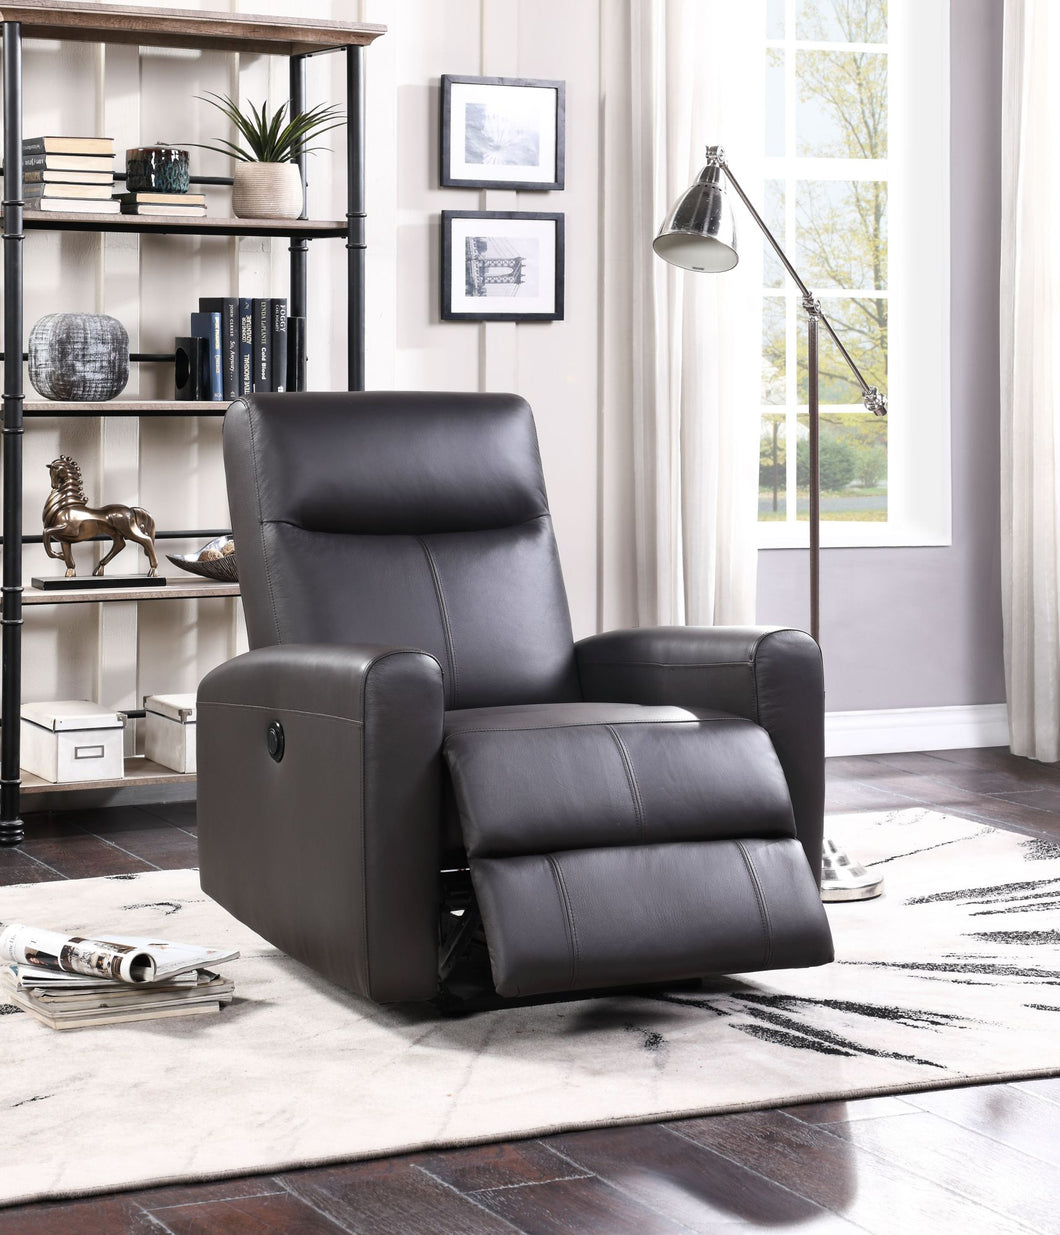 Blane Recliner (Power Motion), Brown Top Grain Leather Match